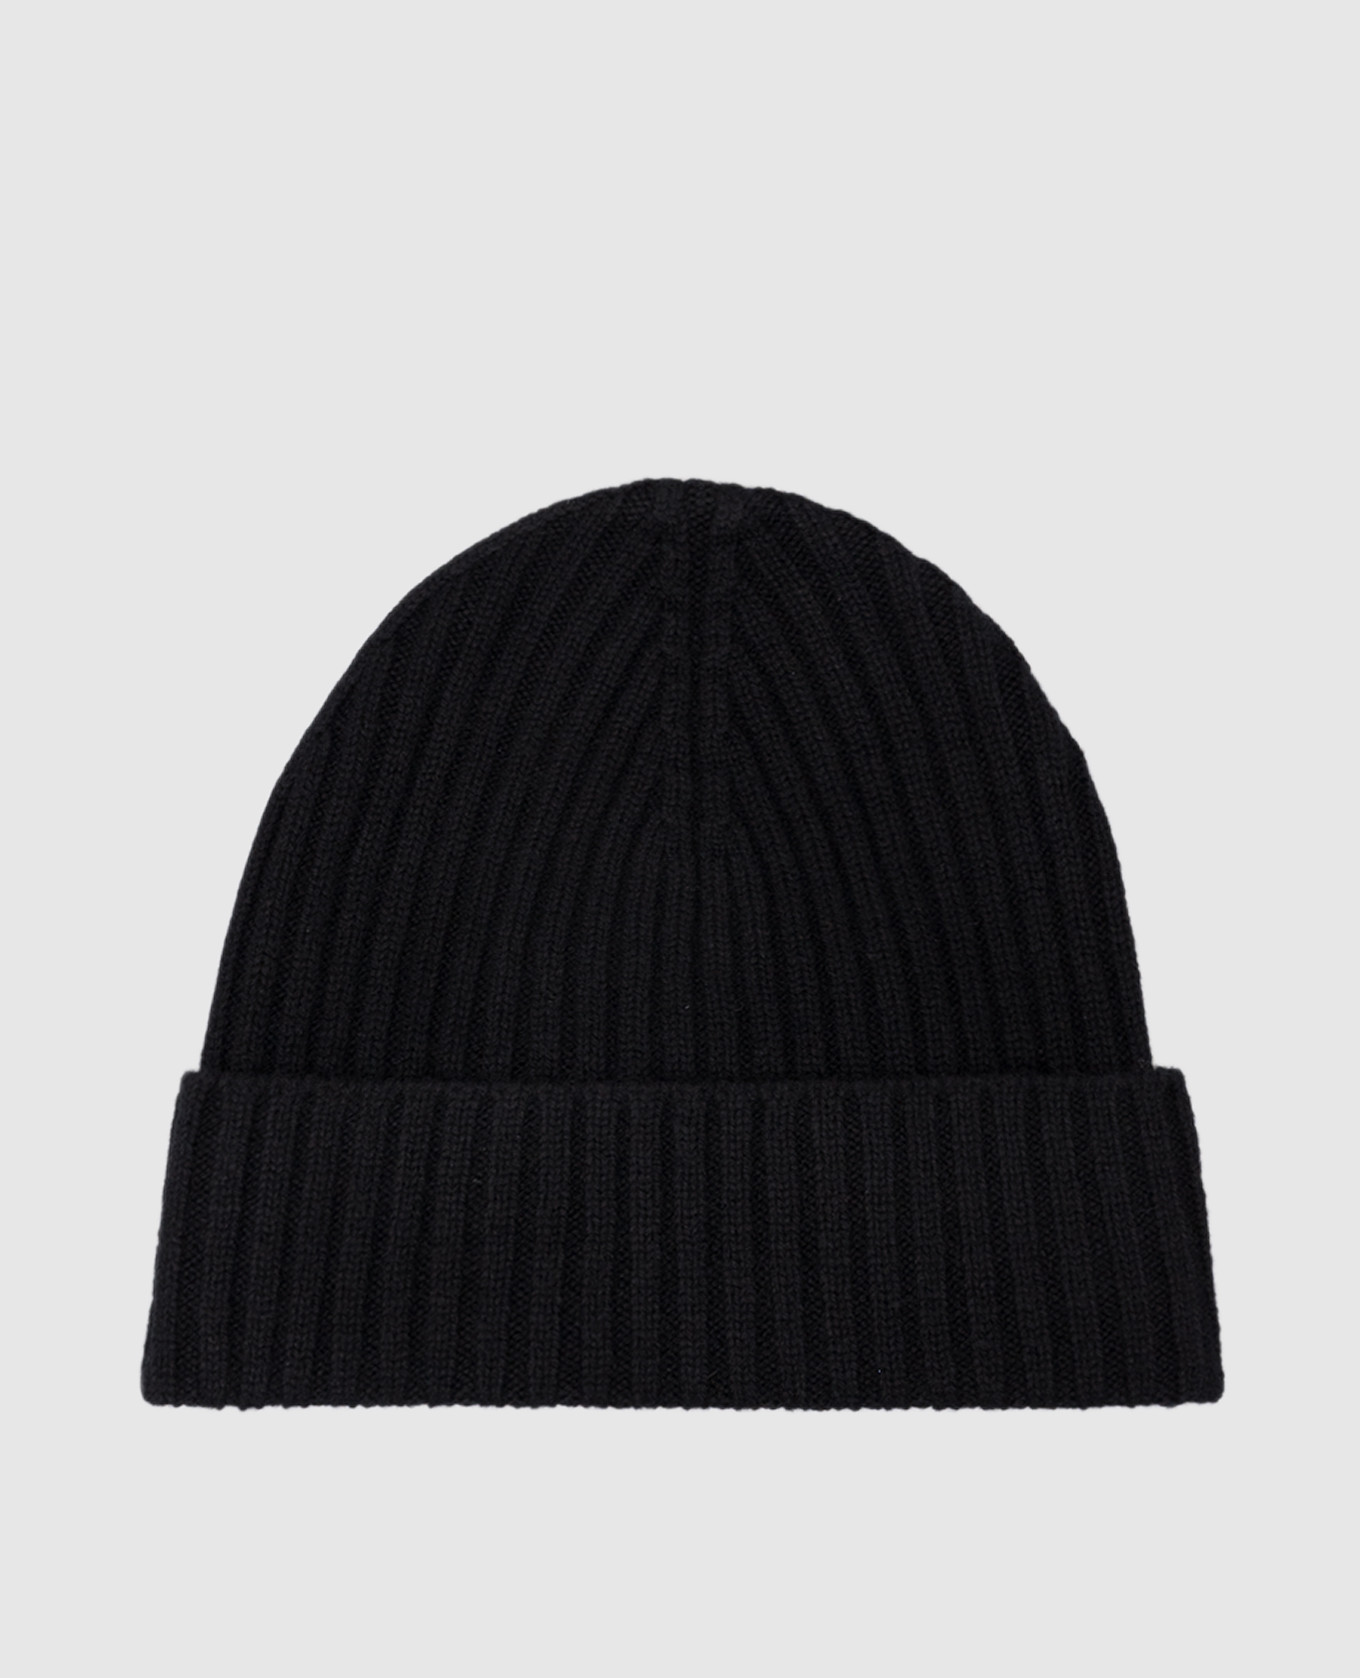 Black cap made of wool and cashmere